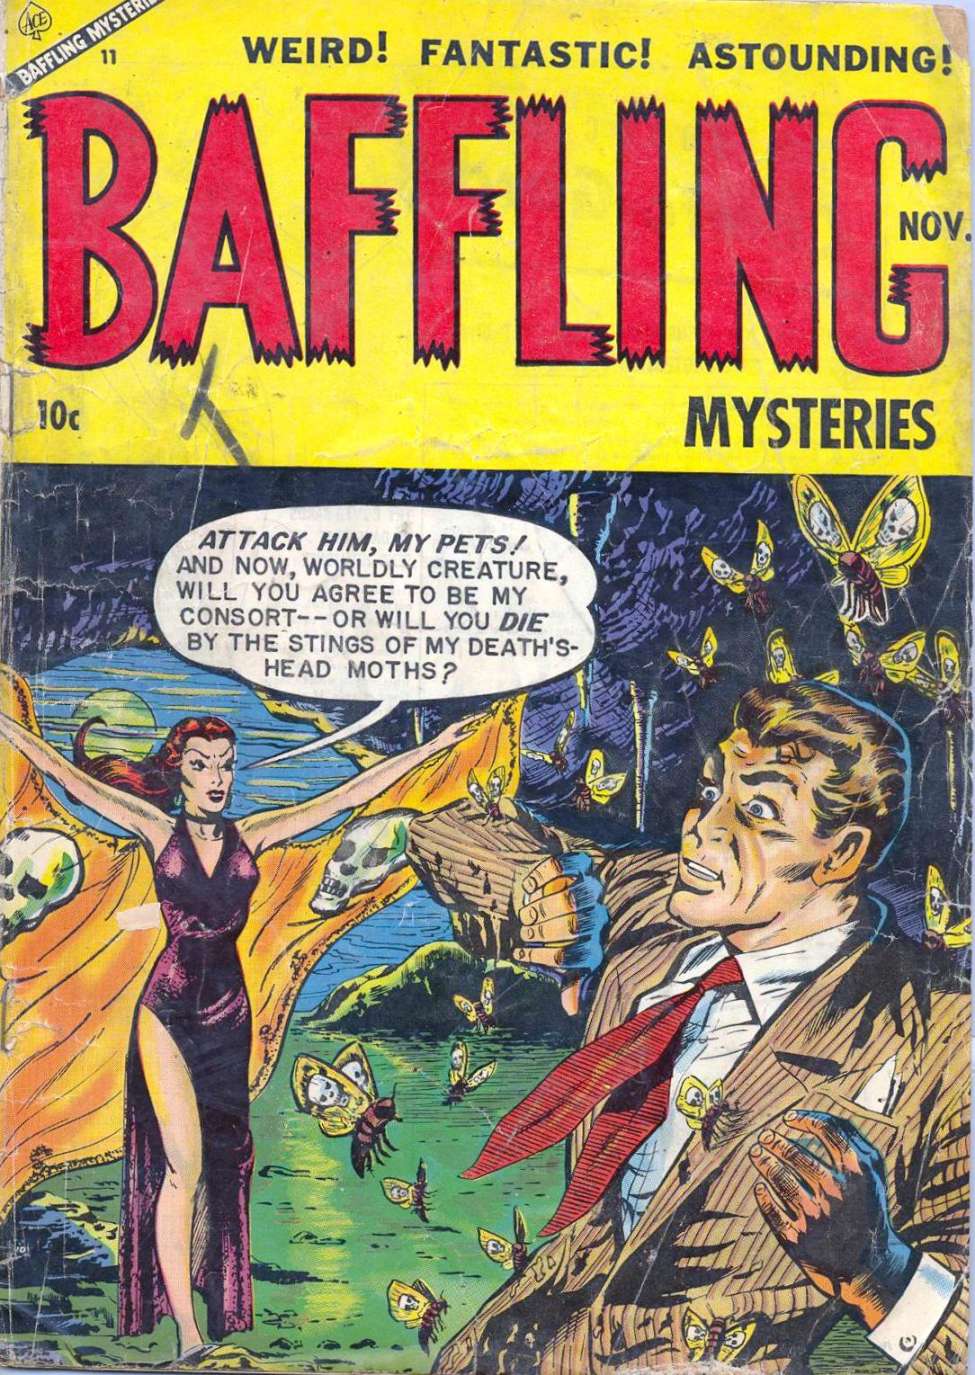 Book Cover For Baffling Mysteries 18 - Version 1